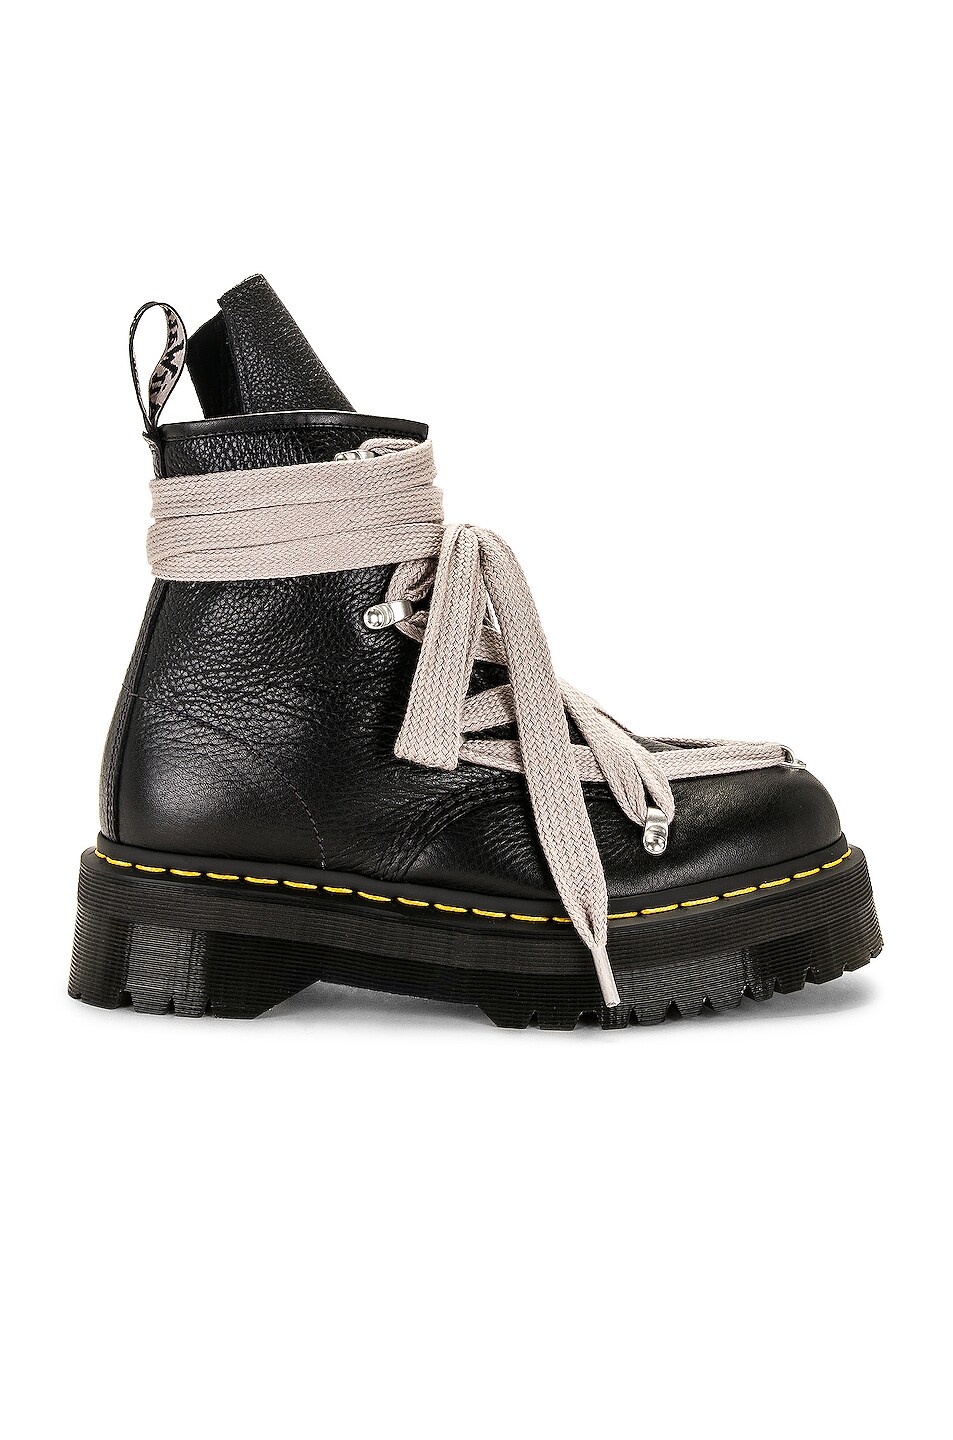 Image 1 of Rick Owens x Dr Martens Quad Sole Pentagram Jumbo Lace Boot in Black